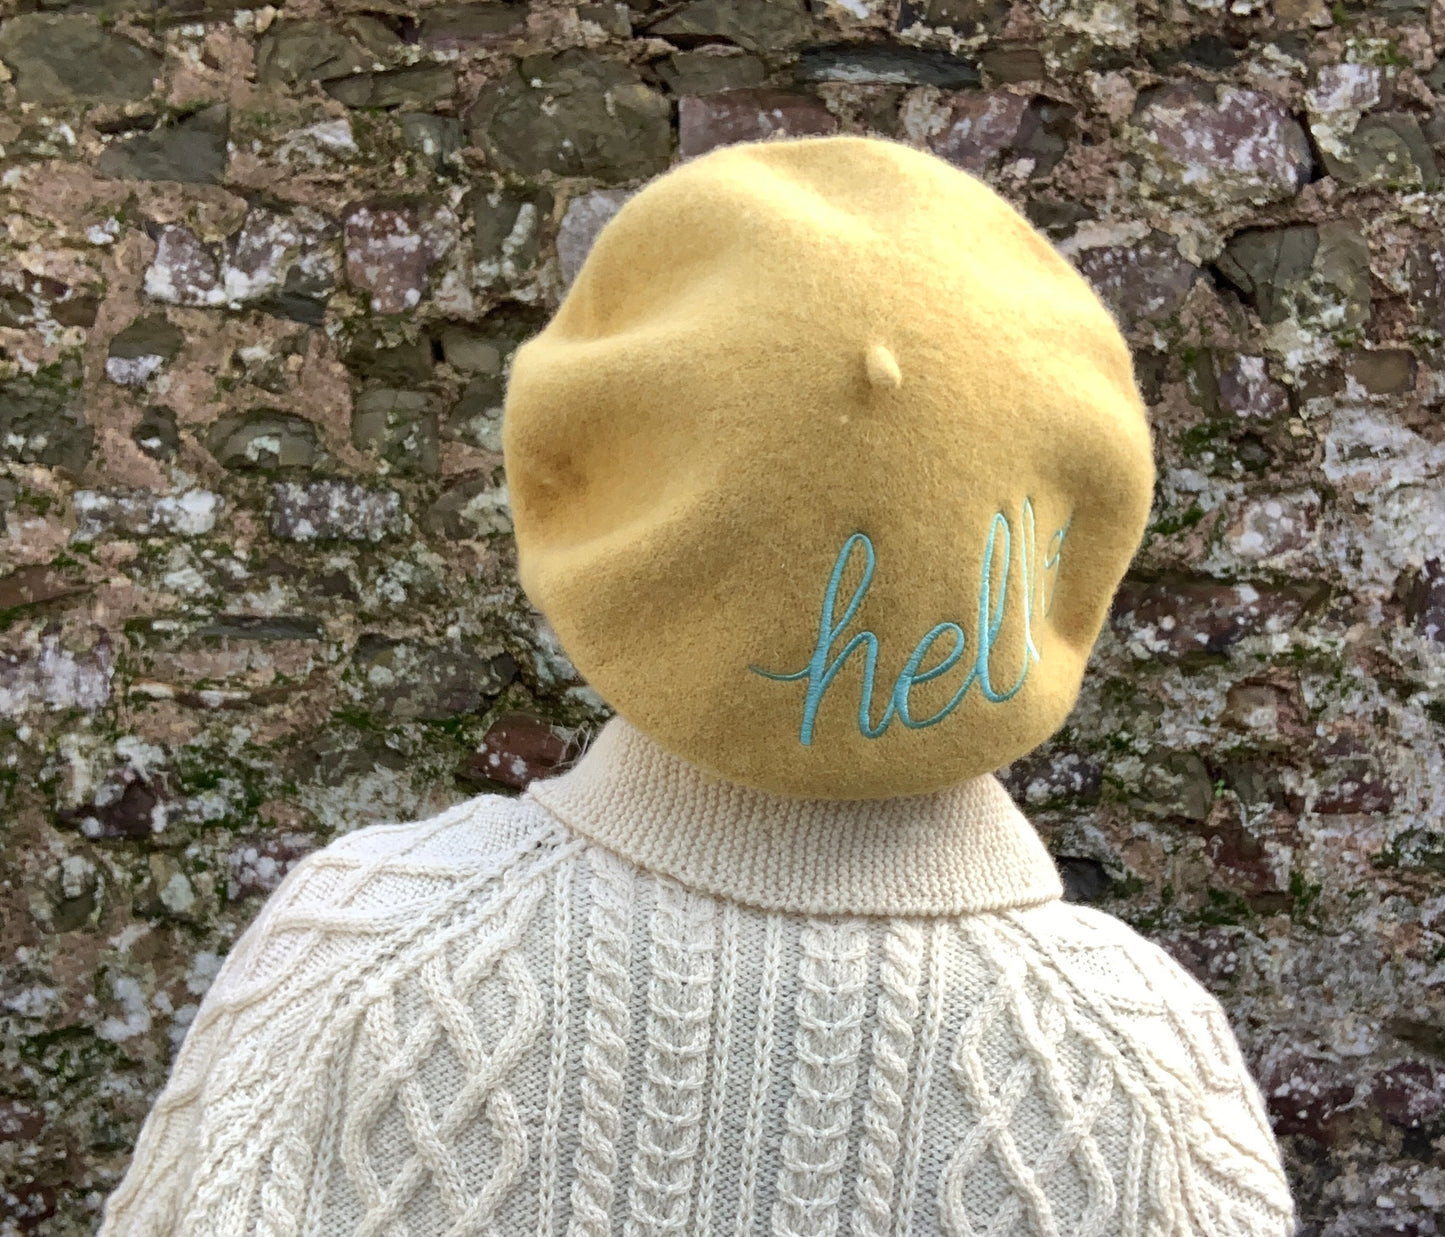 Yellow Wool beret with embroidered Hello message